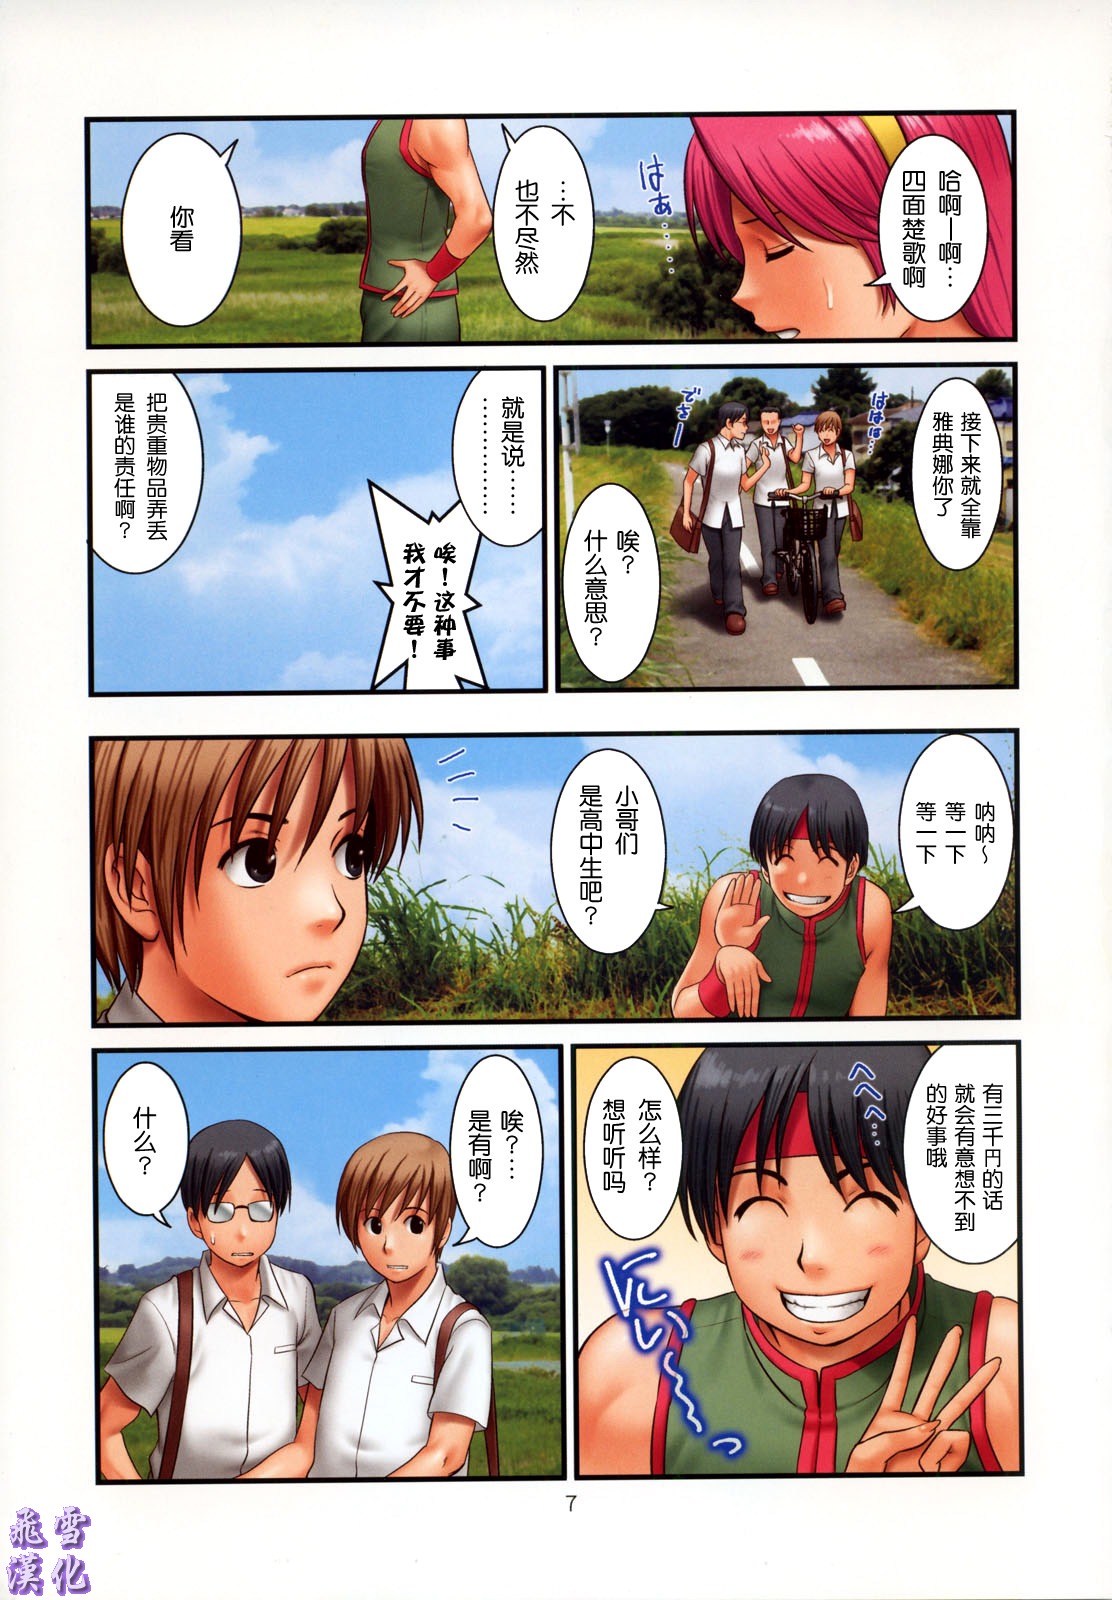 (C76) [Saigado] The Yuri &amp; Friends Fullcolor 10 (King of Fighters) [Chinese] (同人誌) [彩画堂] THE YURI  FRIENDS FULLCOLOR 10 (KOF) [飞雪汉化组]